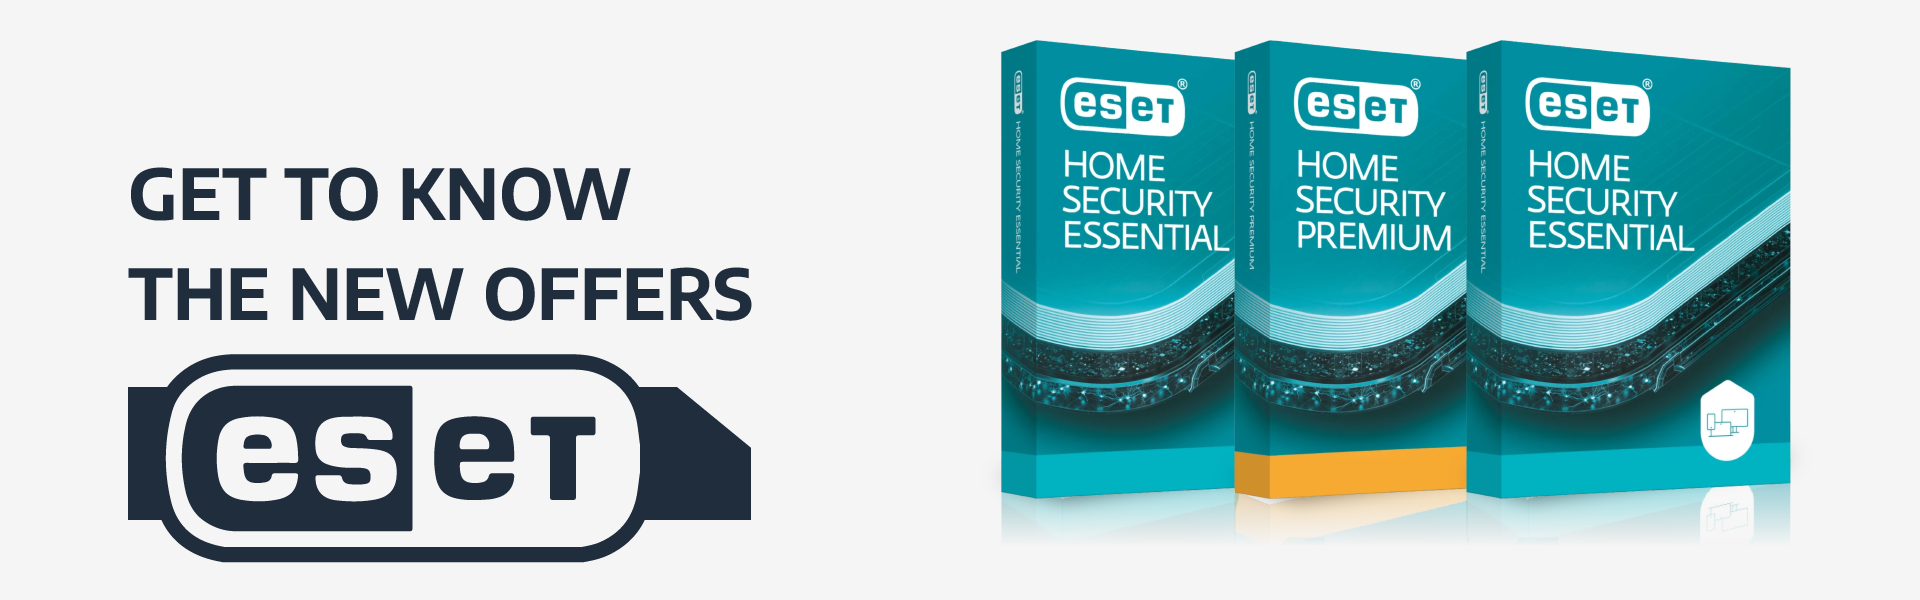 Get to know the new offers ESET!